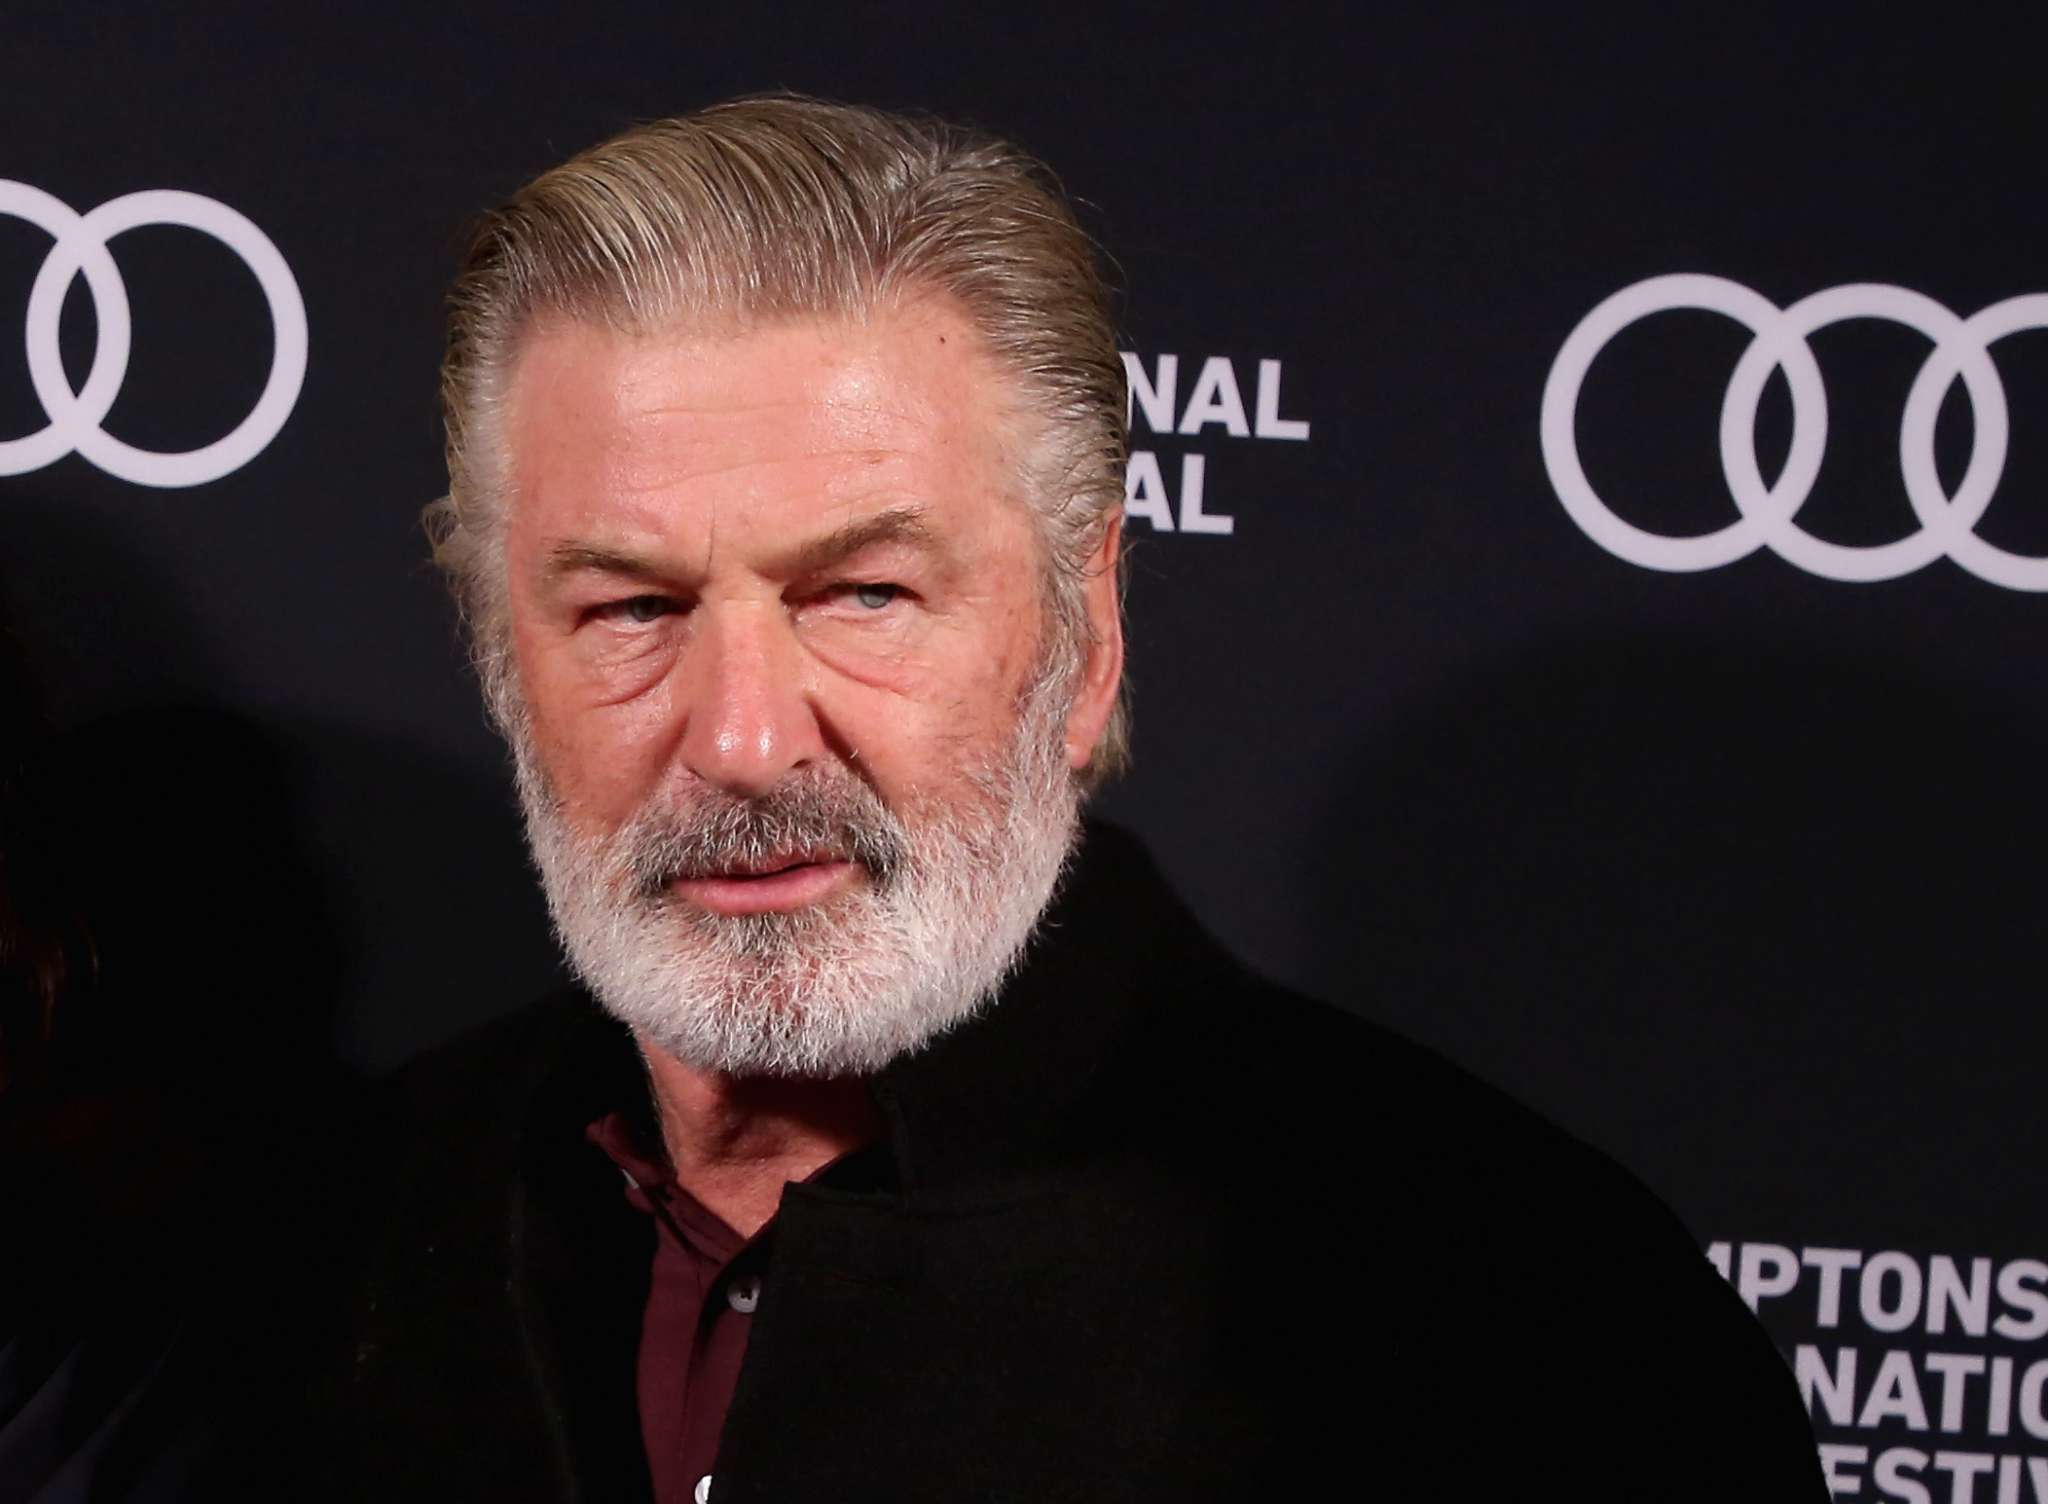 Alec Baldwin Continues Addressing Emotional Messages About The Recent Tragedy